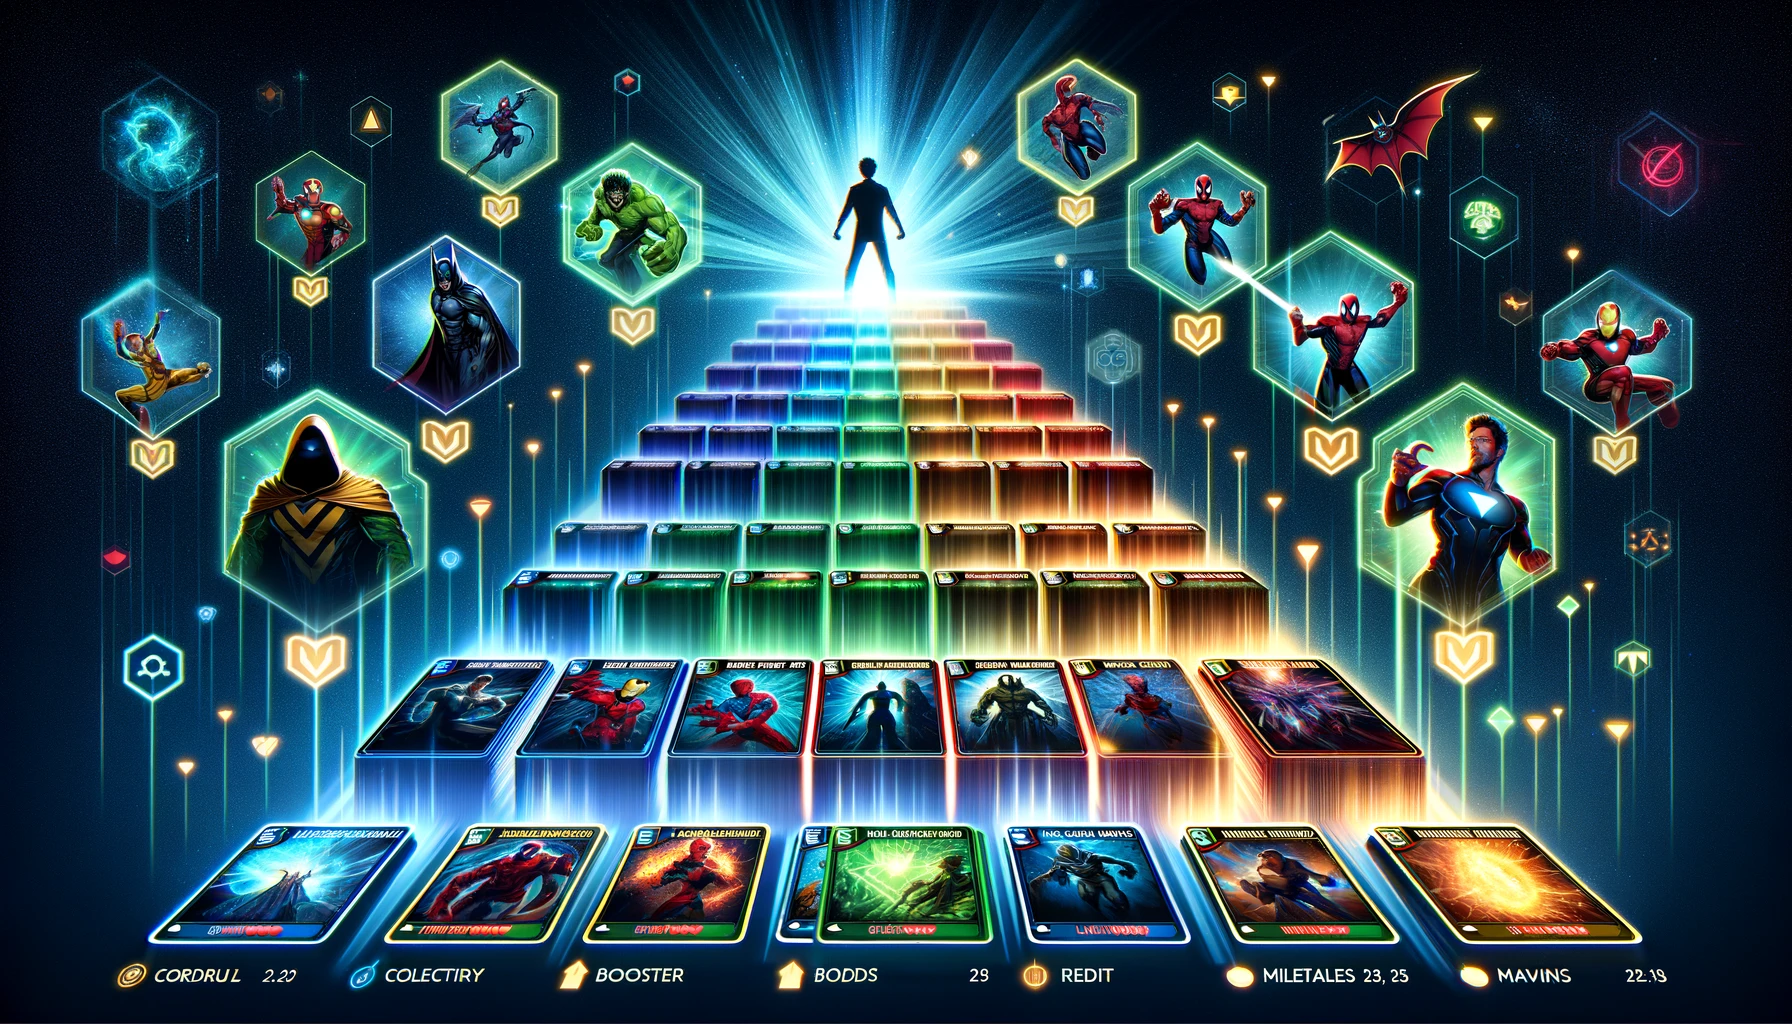 A wide-format image illustrating Marvel Snap's collection level progression. Marvel cards rise through various levels, glowing with energy as they advance. Boosters, credits, and milestones visually symbolize card upgrading with superheroes and villains representing progression stages.